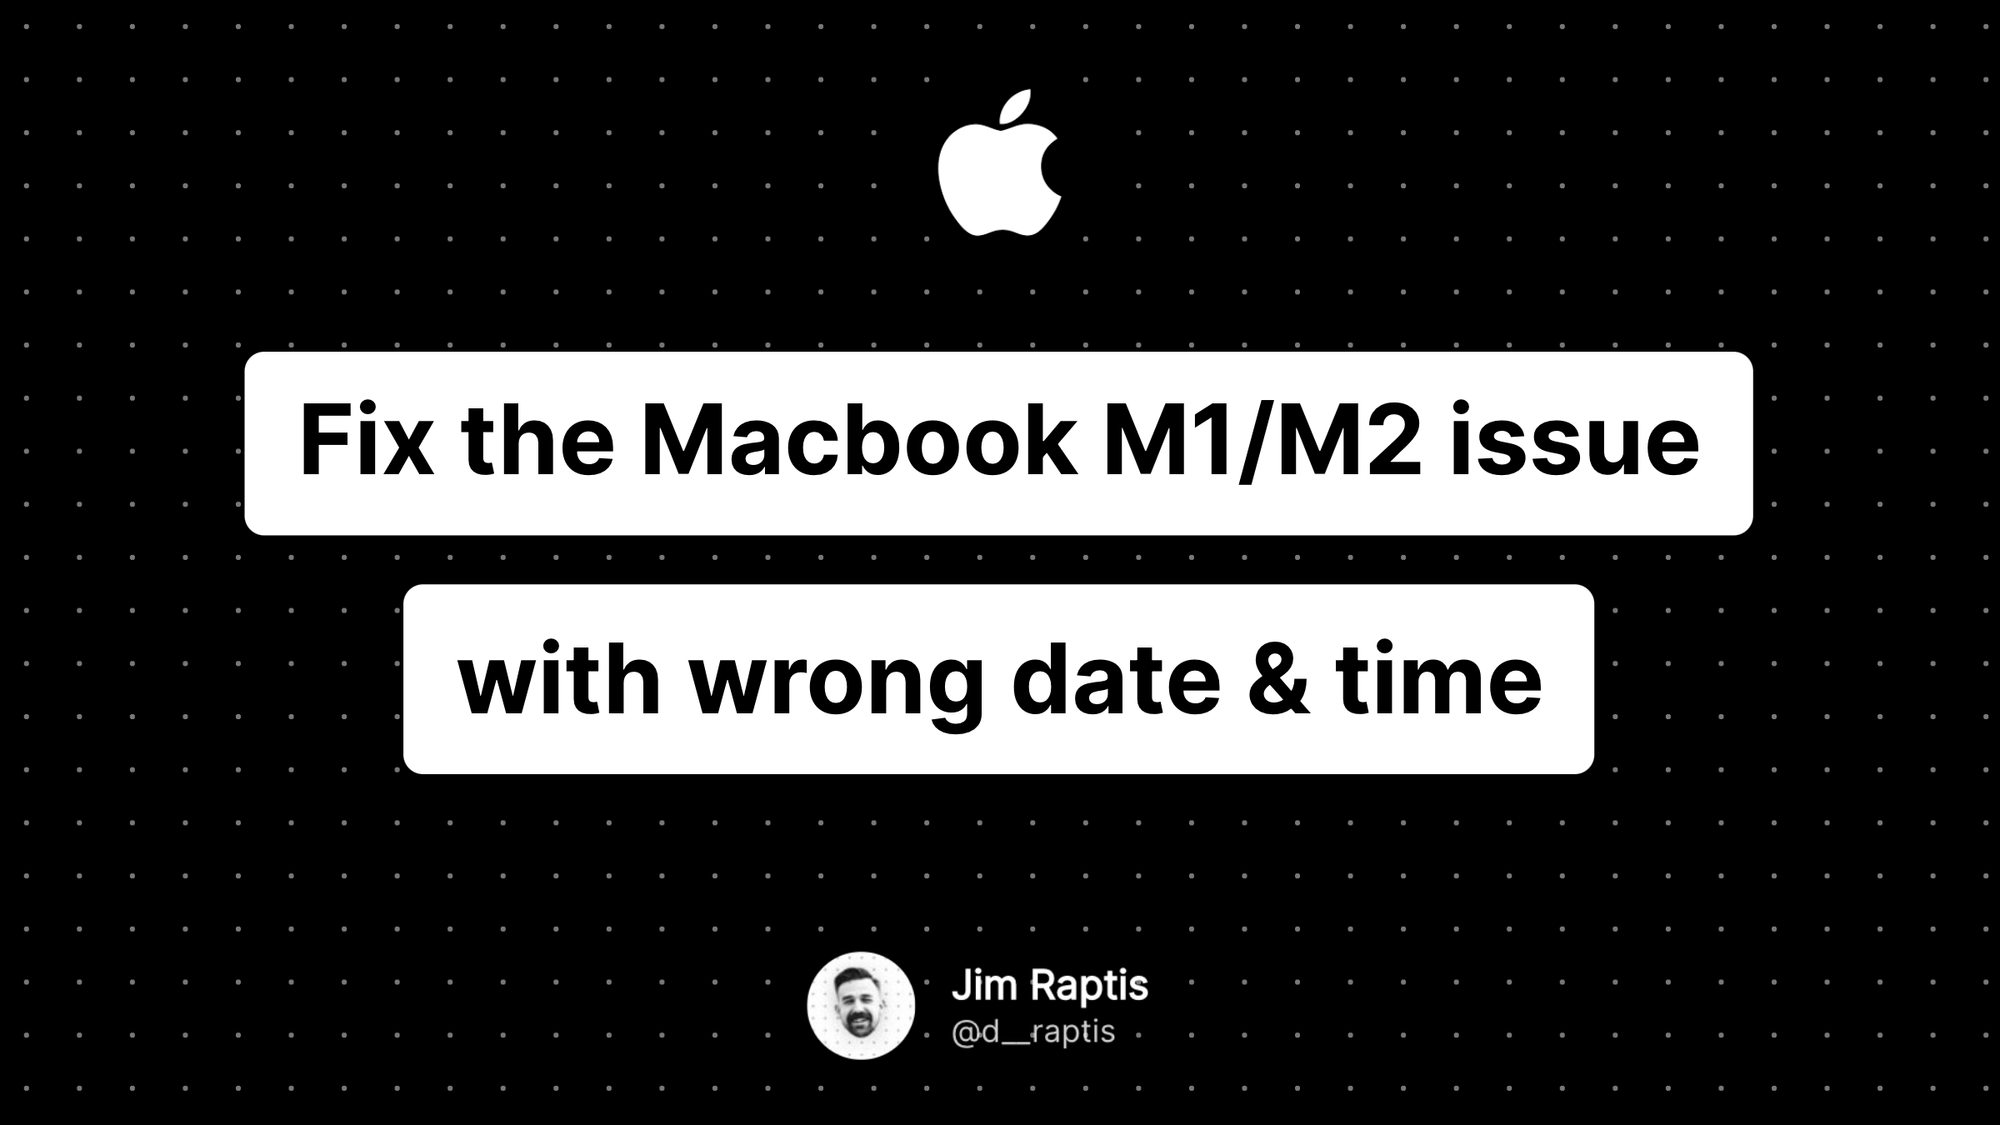 Fix the Macbook M1/M2 issue with wrong date & time